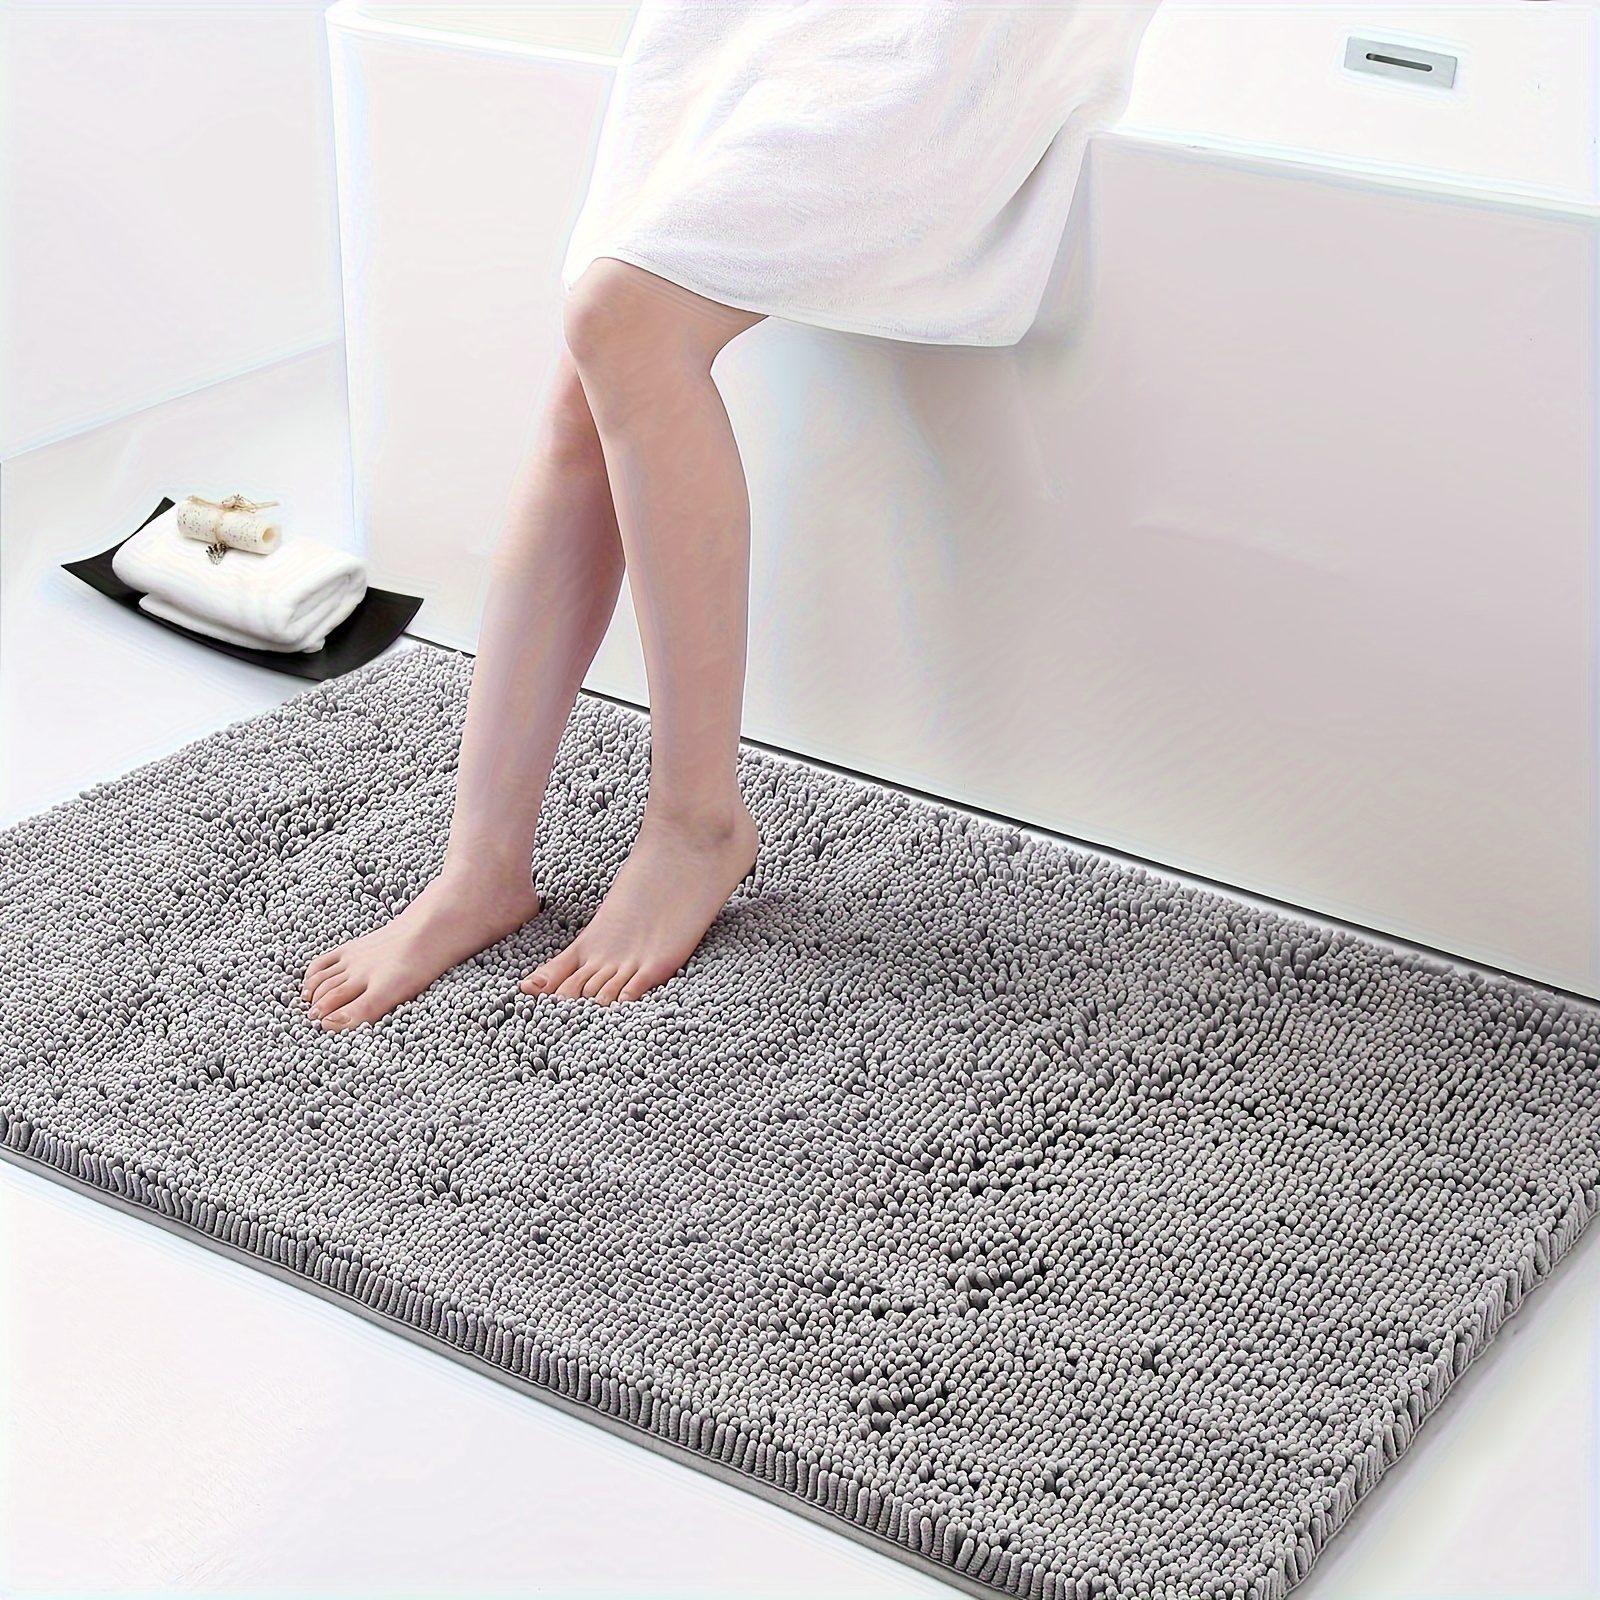 1pc Solid Color Long Plush Bathroom Mat, Modern Minimalist Superfine Fiber  Material Water Absorbing Quick Drying, Suitable For Shower Room, Bedroom,  Study Room, Doorway, Machine Washable